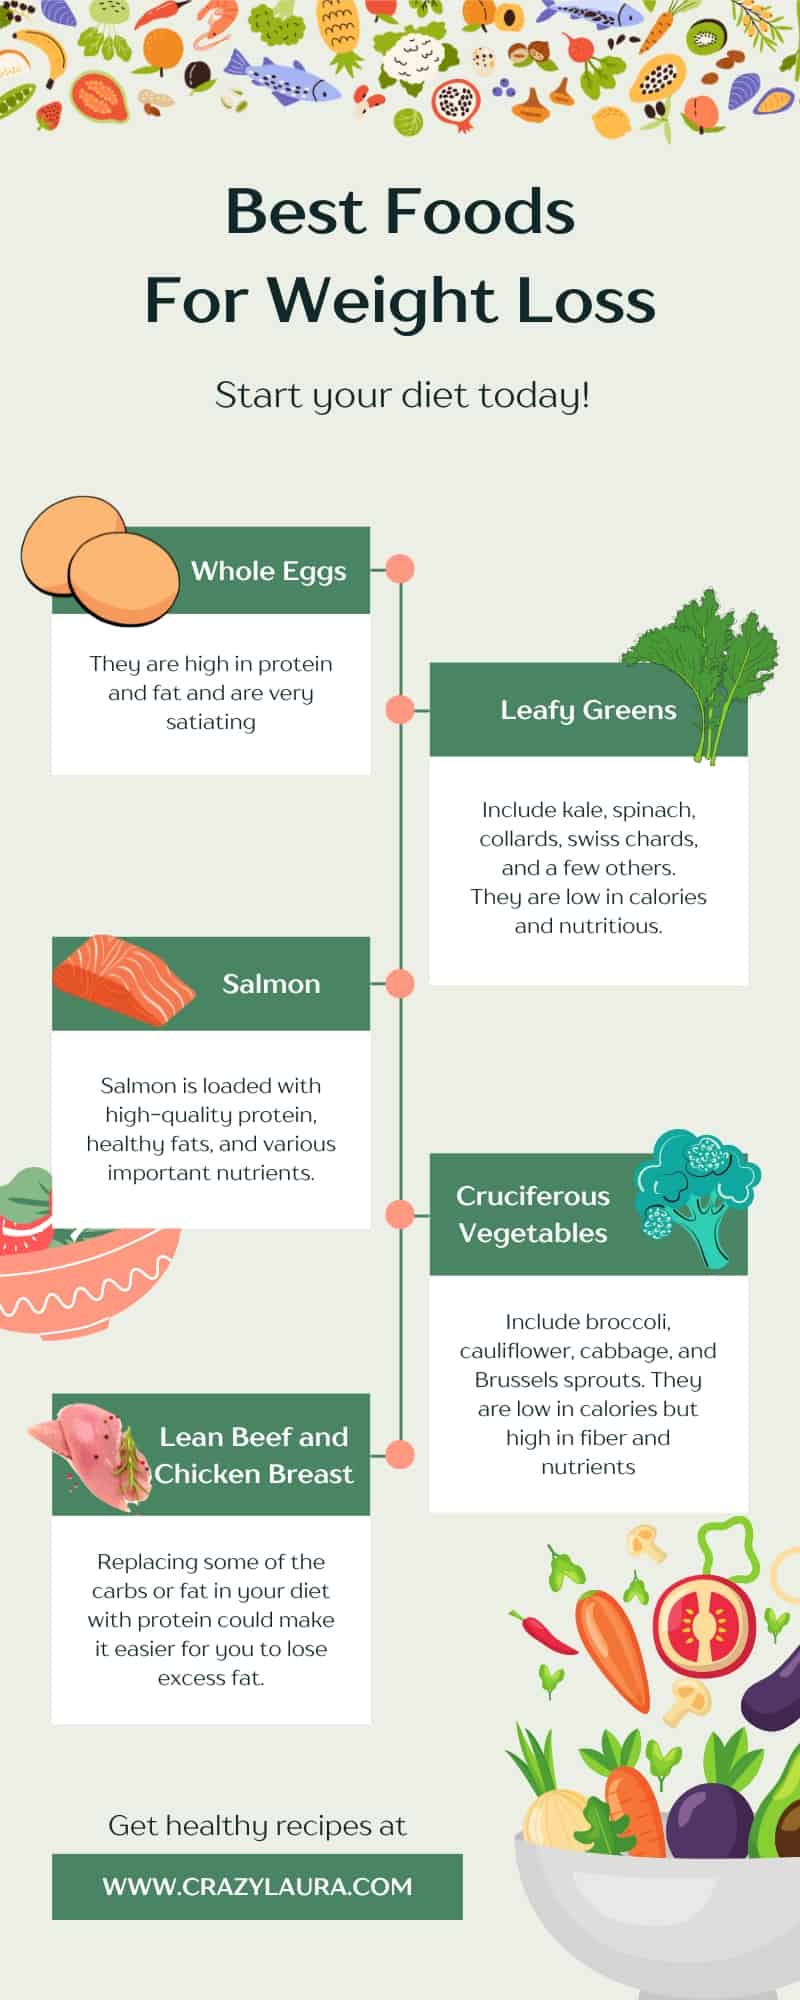 Best Foods For Weight Loss Infographic - CrazyLaura